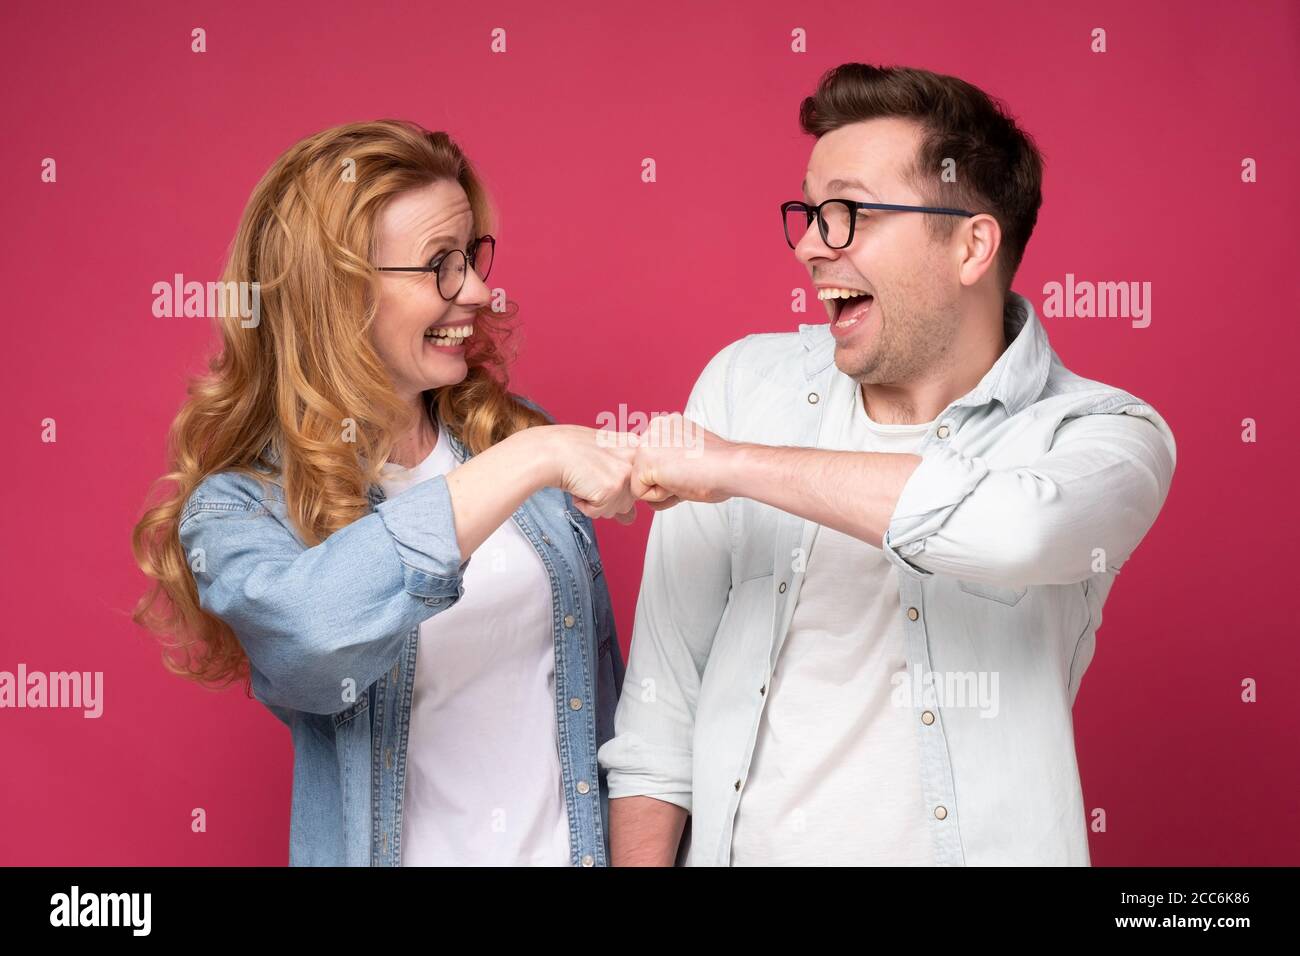 Caucaisan woman and man, friends or coworkers bumping fist Stock Photo